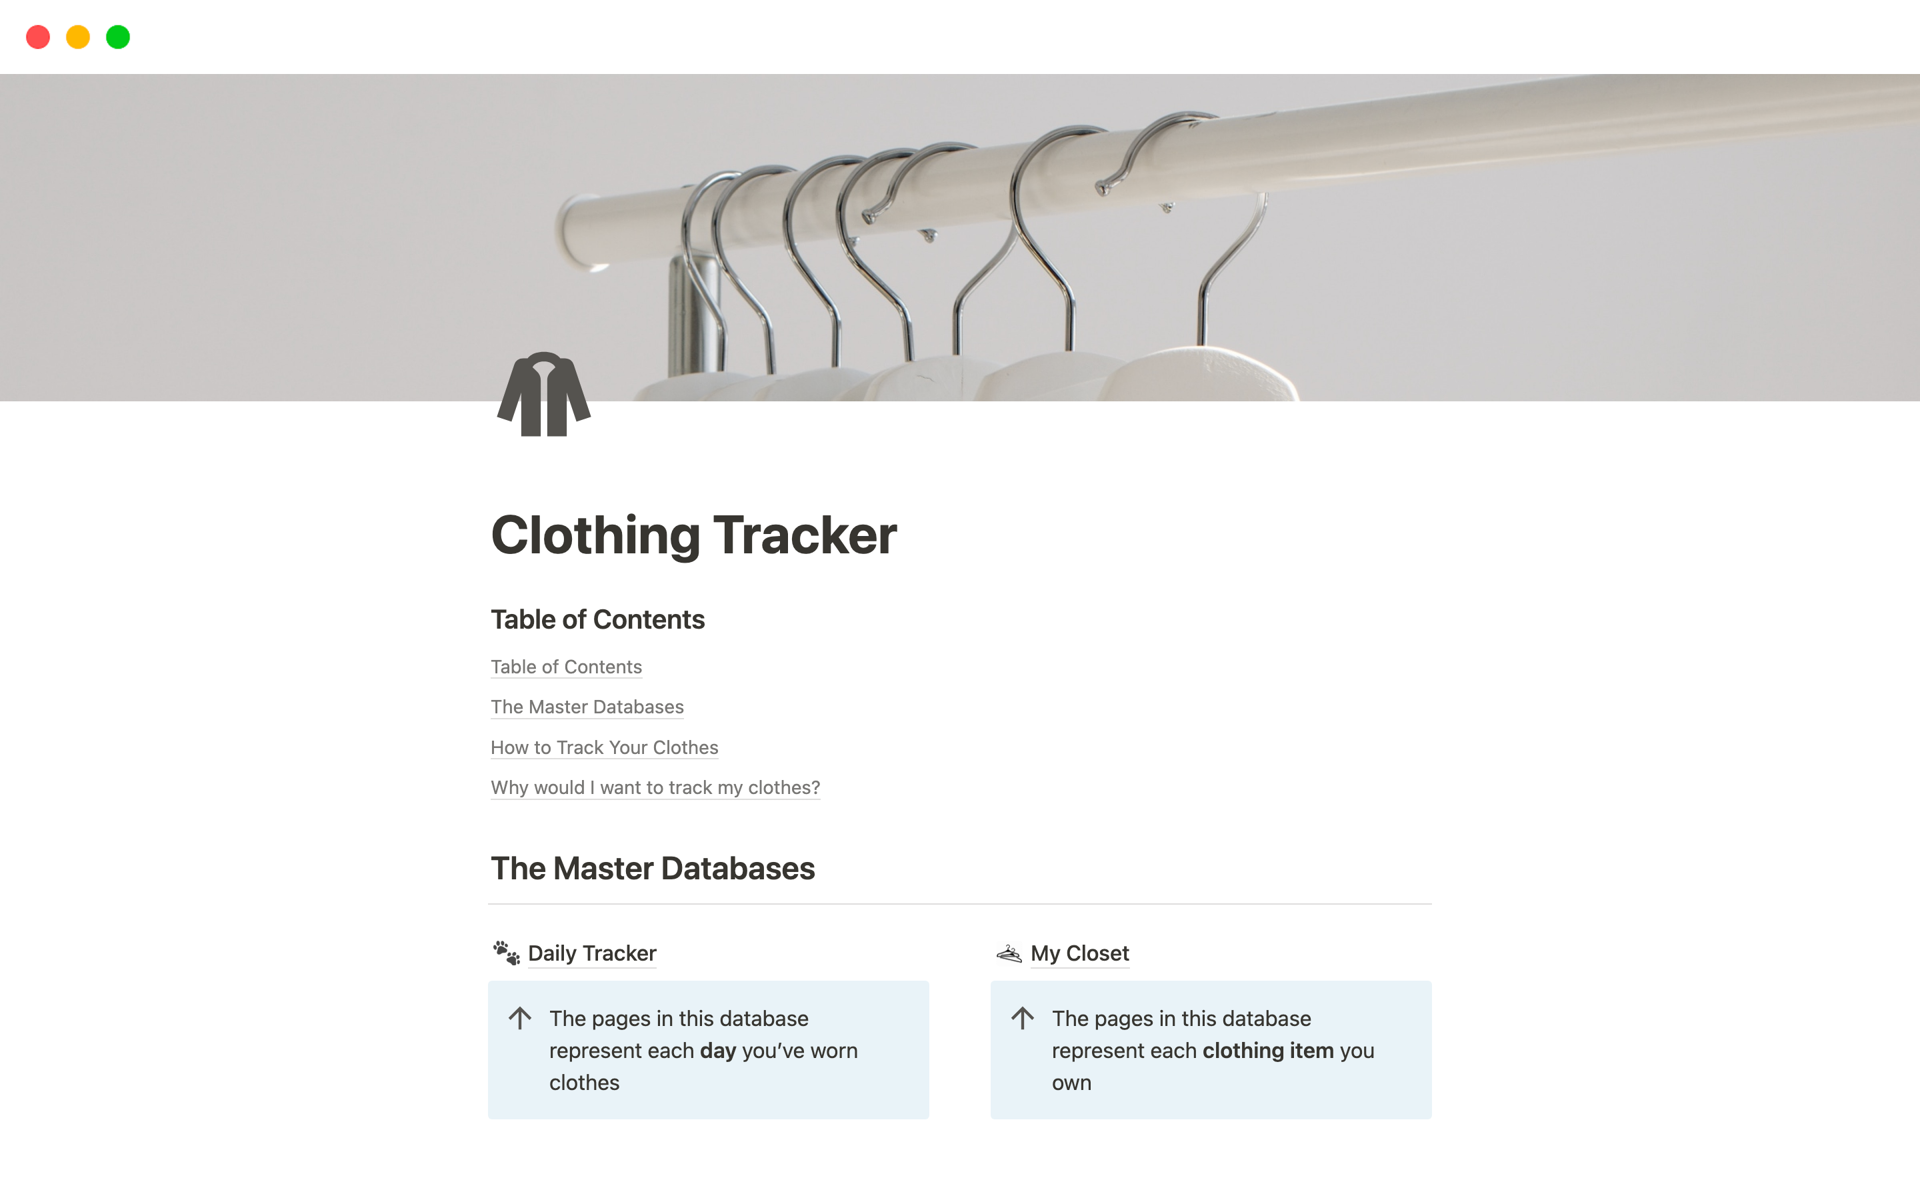 Track your clothing to see what you 'actually' wear.